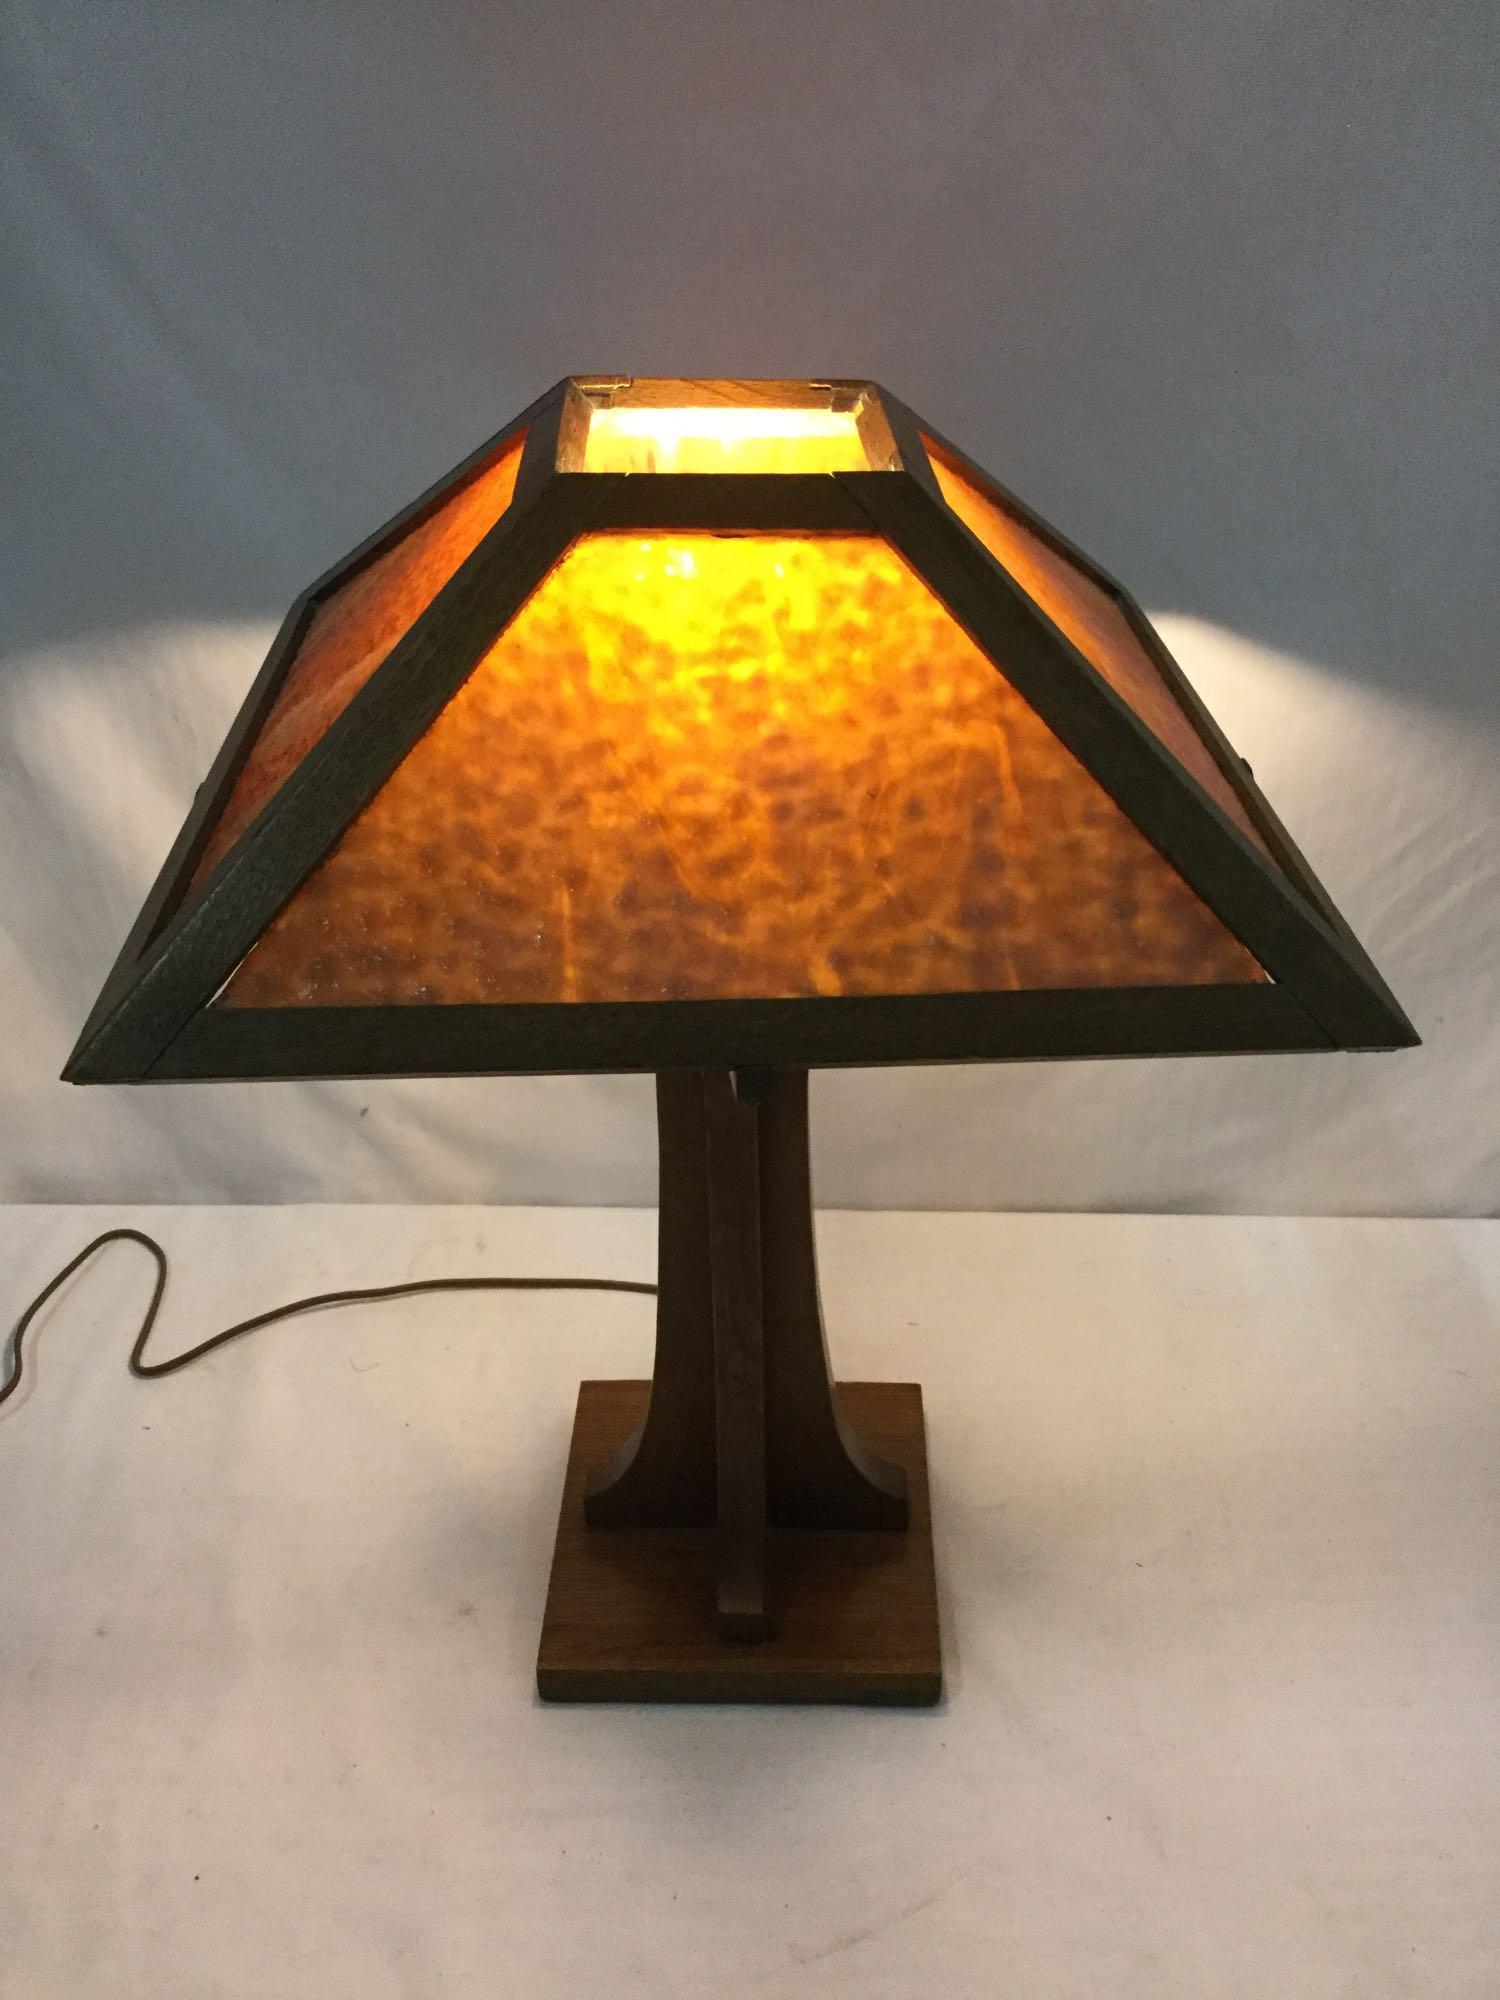 Vintage mission style lamp w/ stained glass panels. 1 panel has small chip. Tested and working